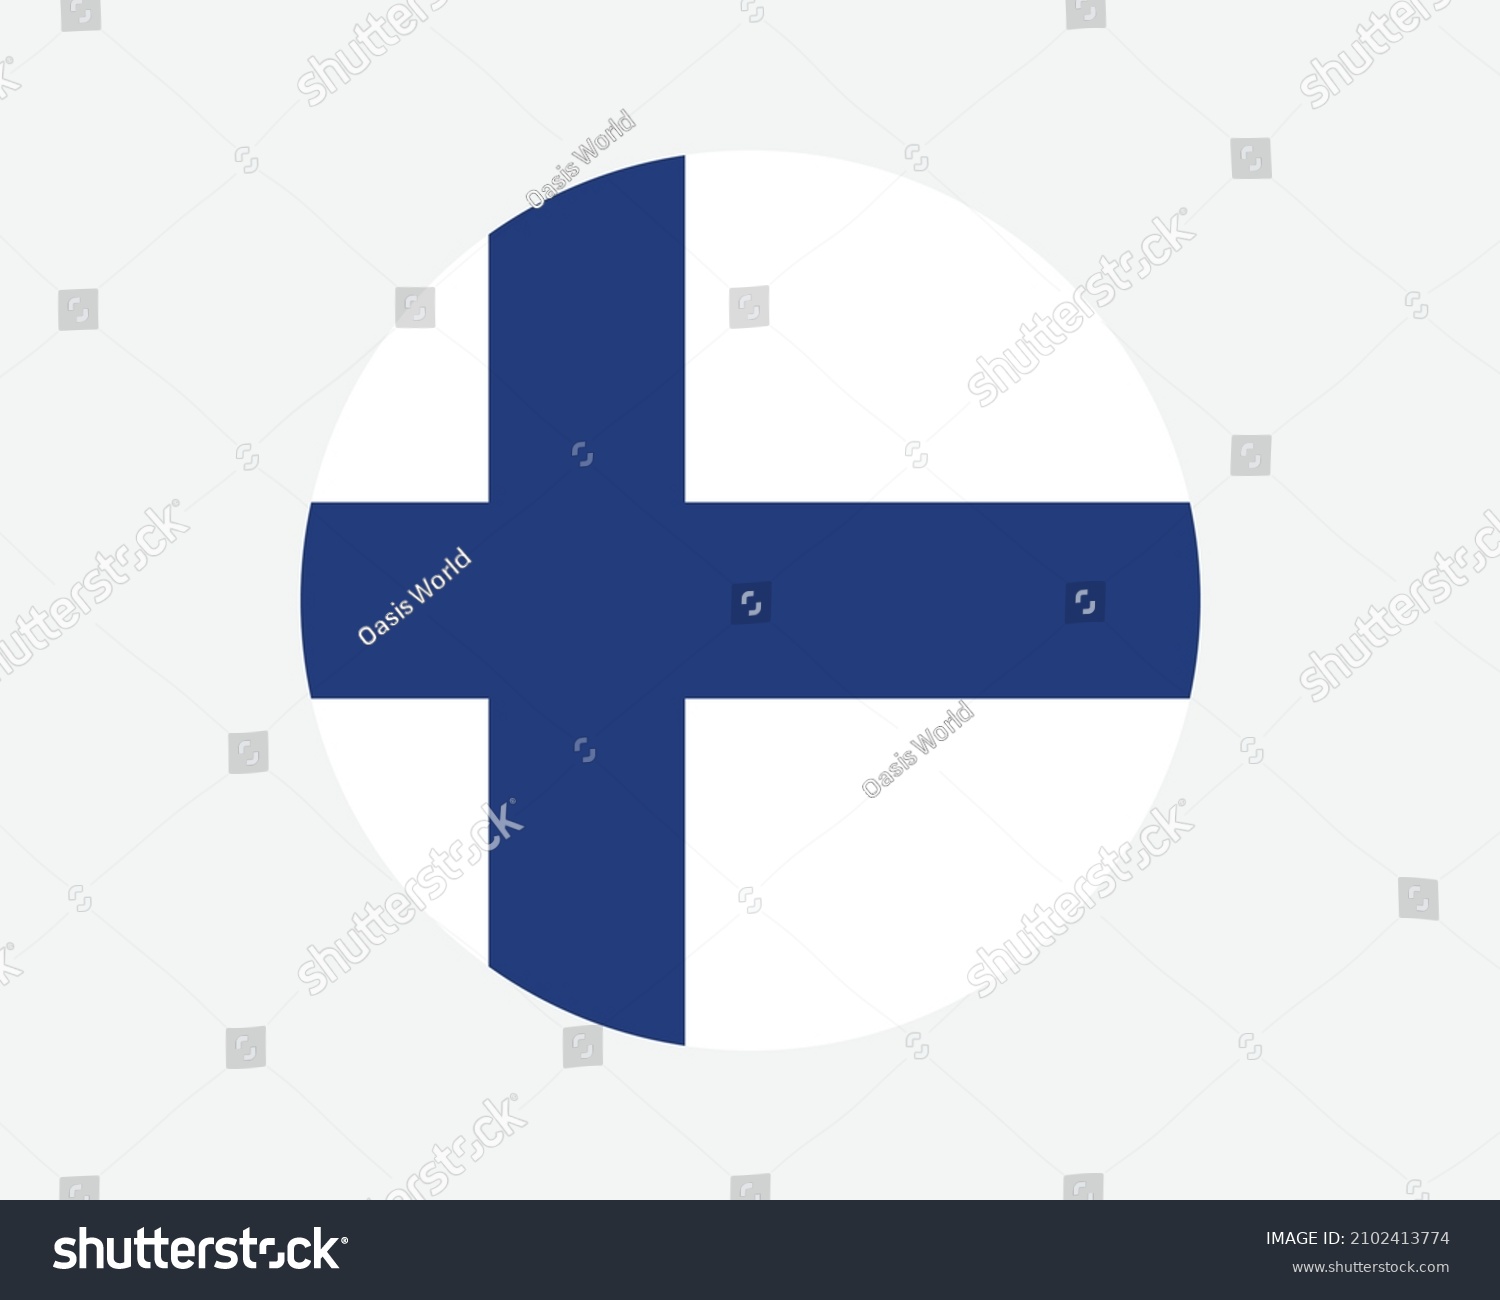 SVG of Finland Round Country Flag. Circular Finnish National Flag. Republic of Finland Circle Shape Button Banner. EPS Vector Illustration. svg